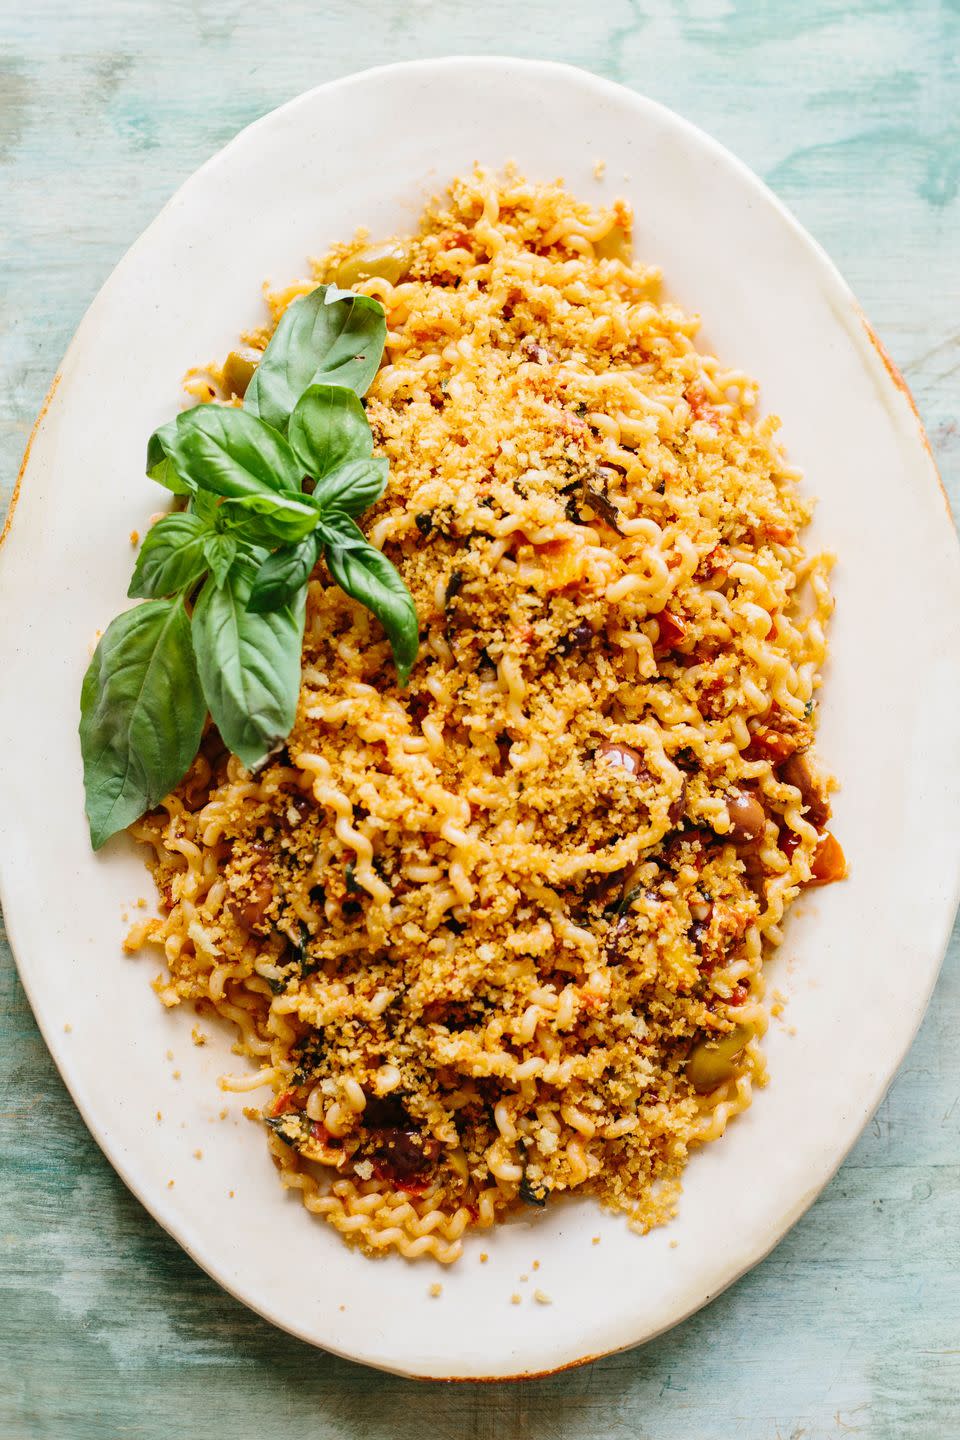 Pasta With Olives, Anchovies, Tomatoes, and Breadcrumbs